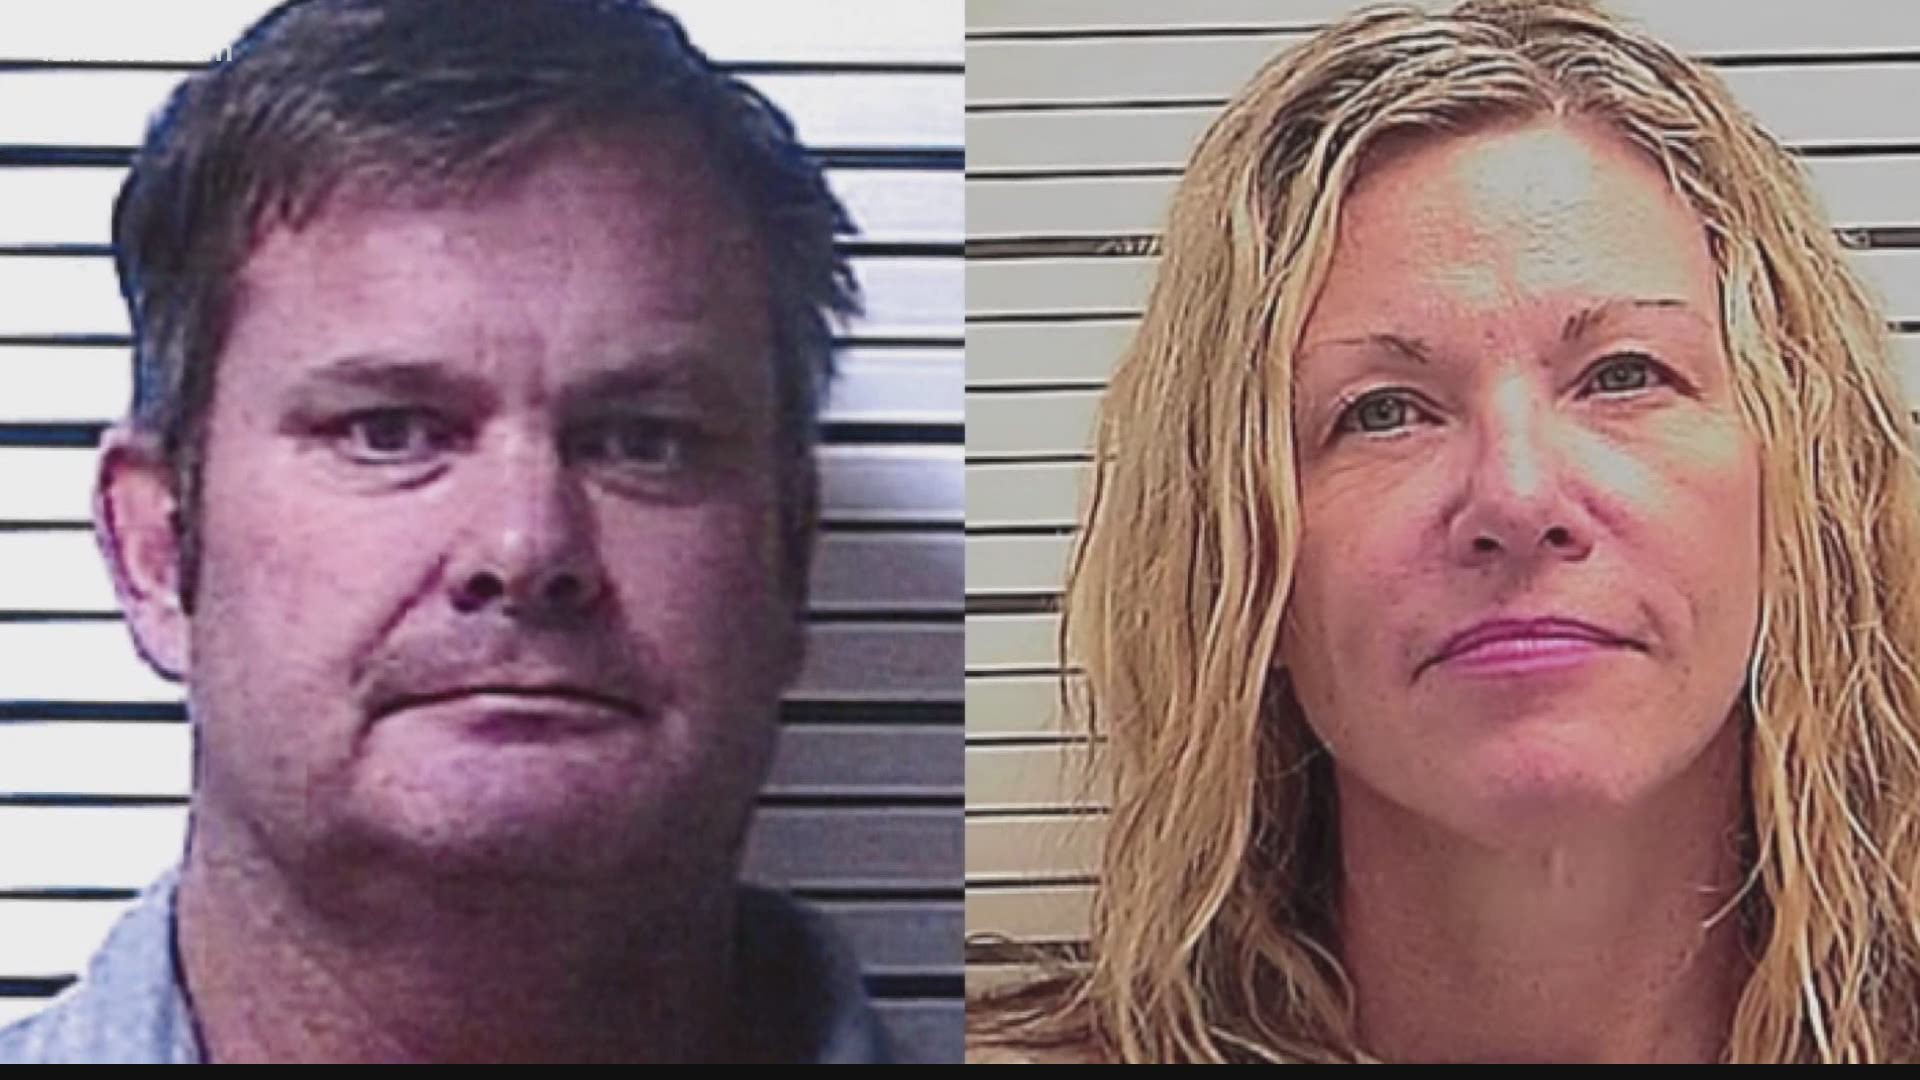 A grand jury indicted both Chad and Lori Vallow Daybell on first-degree murder in the deaths of Lori's two kids, 7-year-old JJ Vallow and 17-year-old Tylee Ryan.